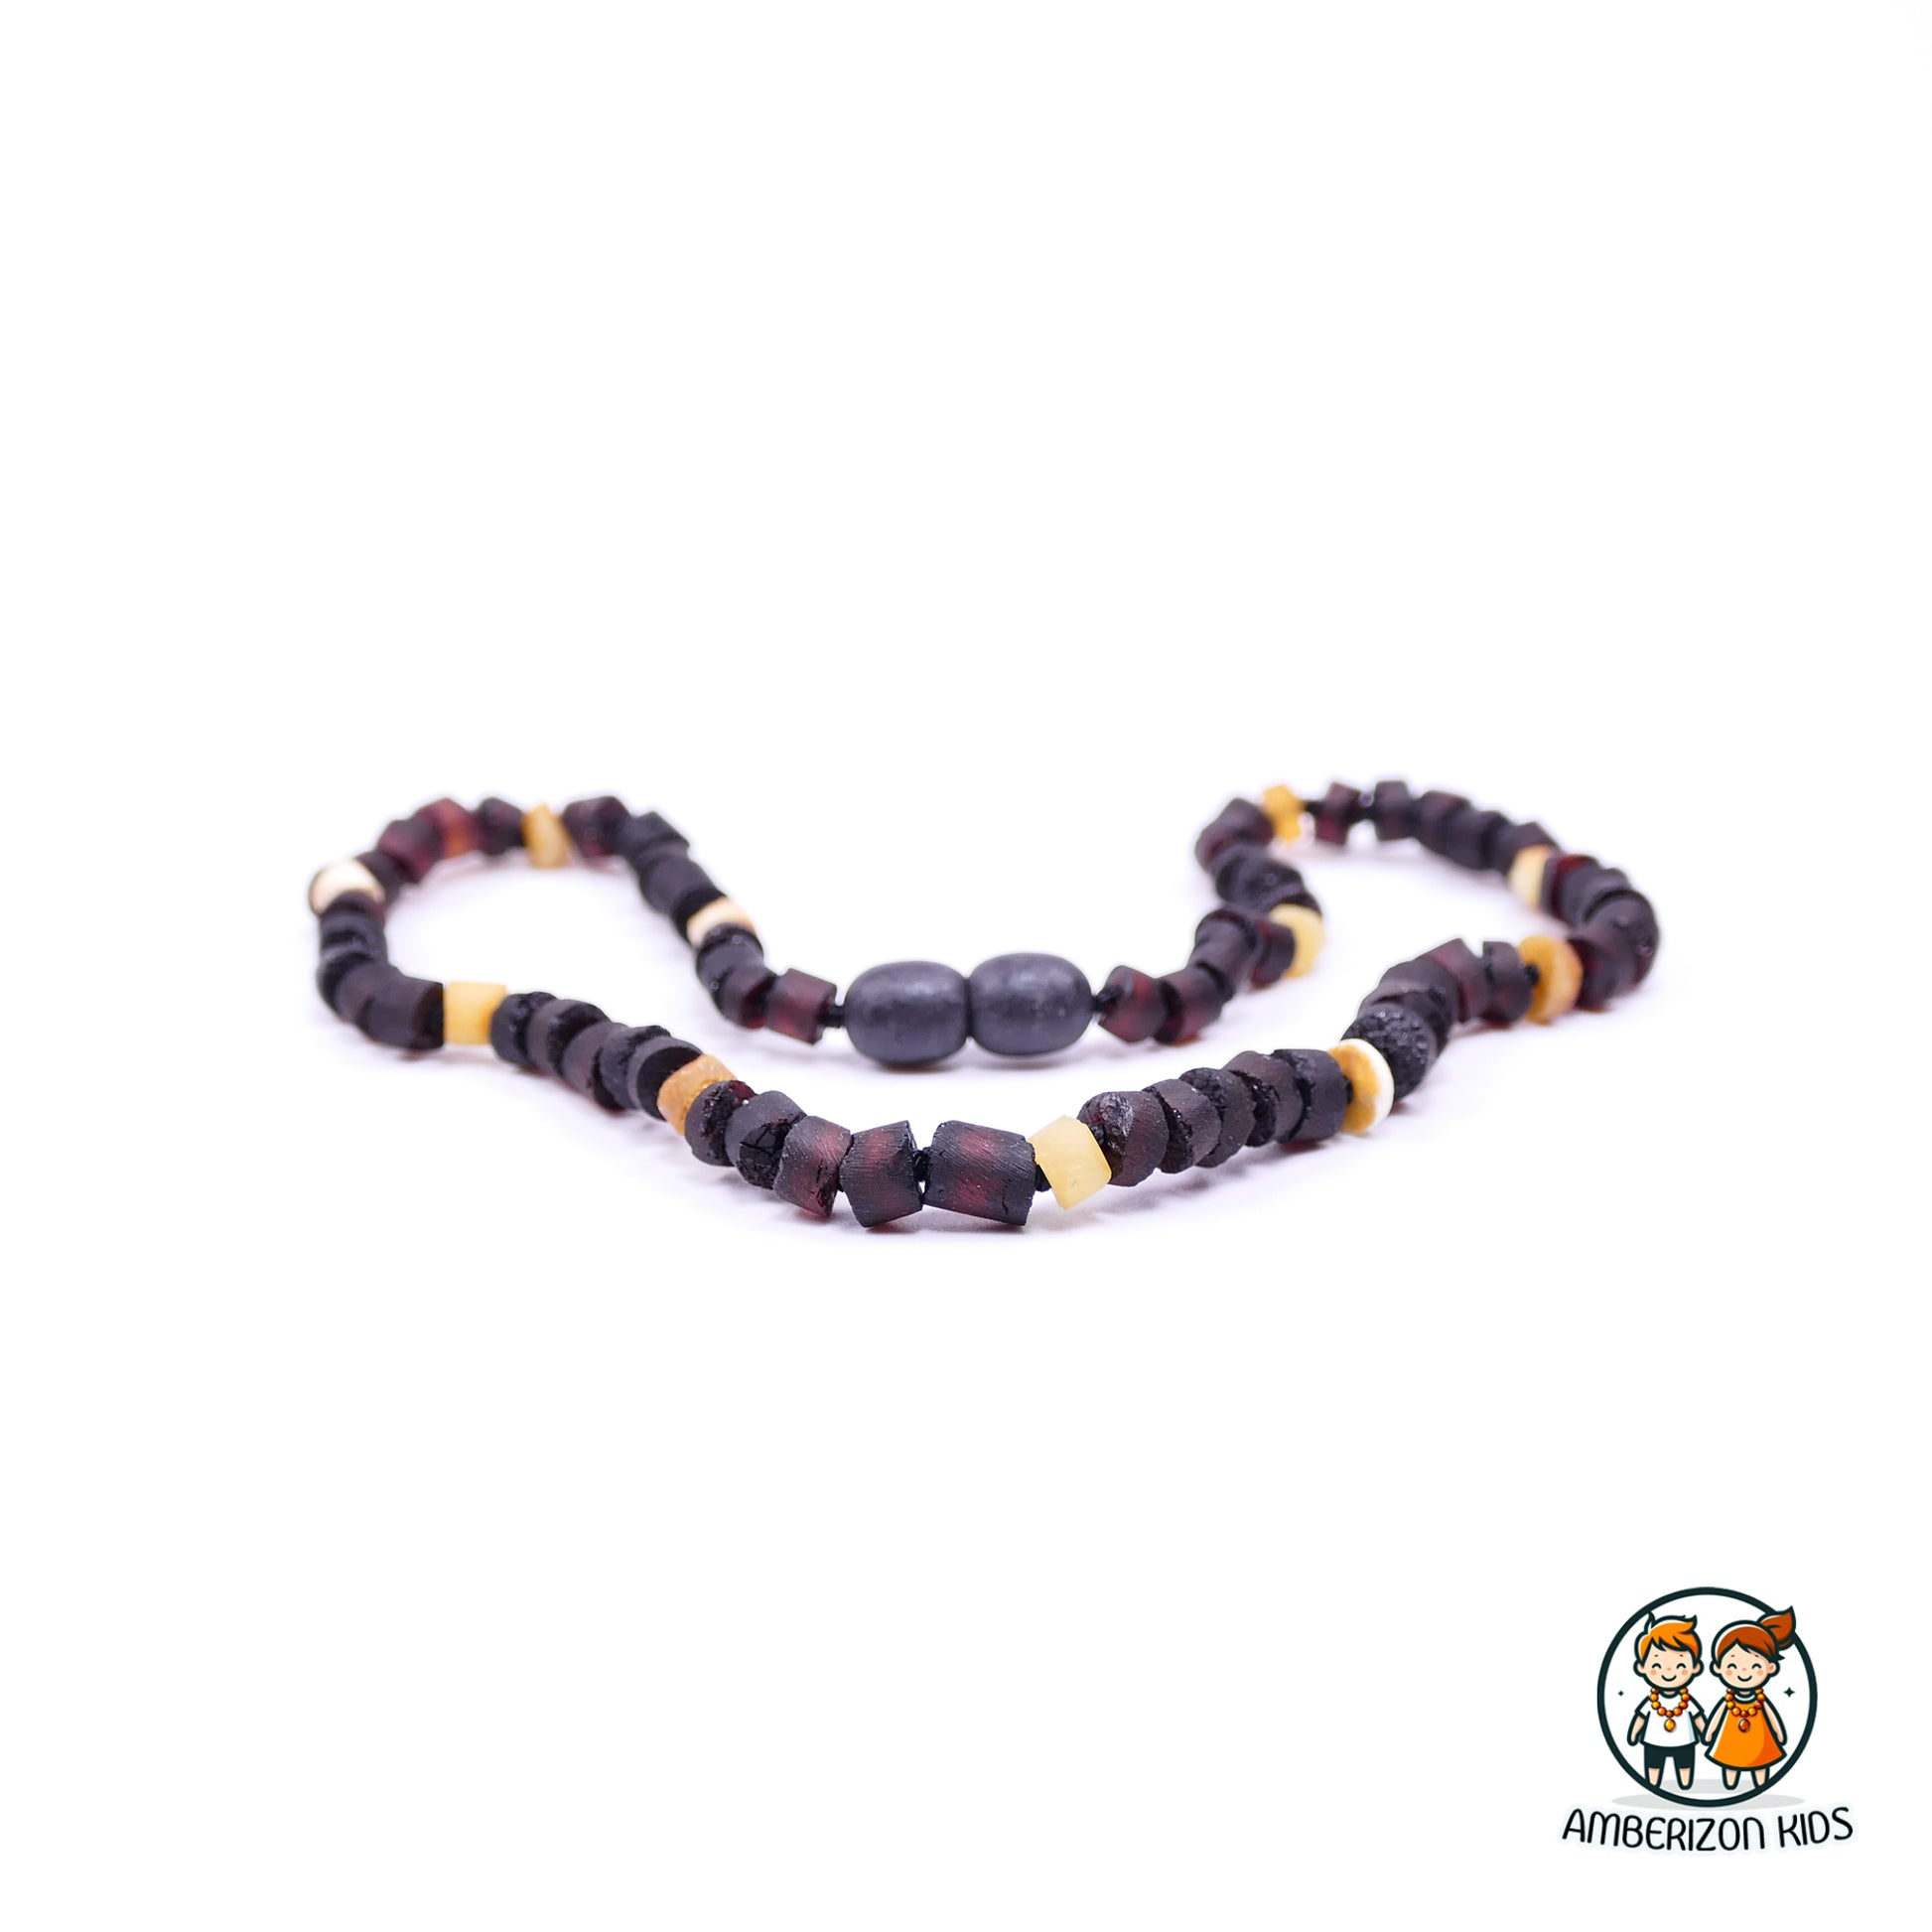 Baby Teething Amber Necklace: Raw Cylindrical Beads in Dark Multicolor